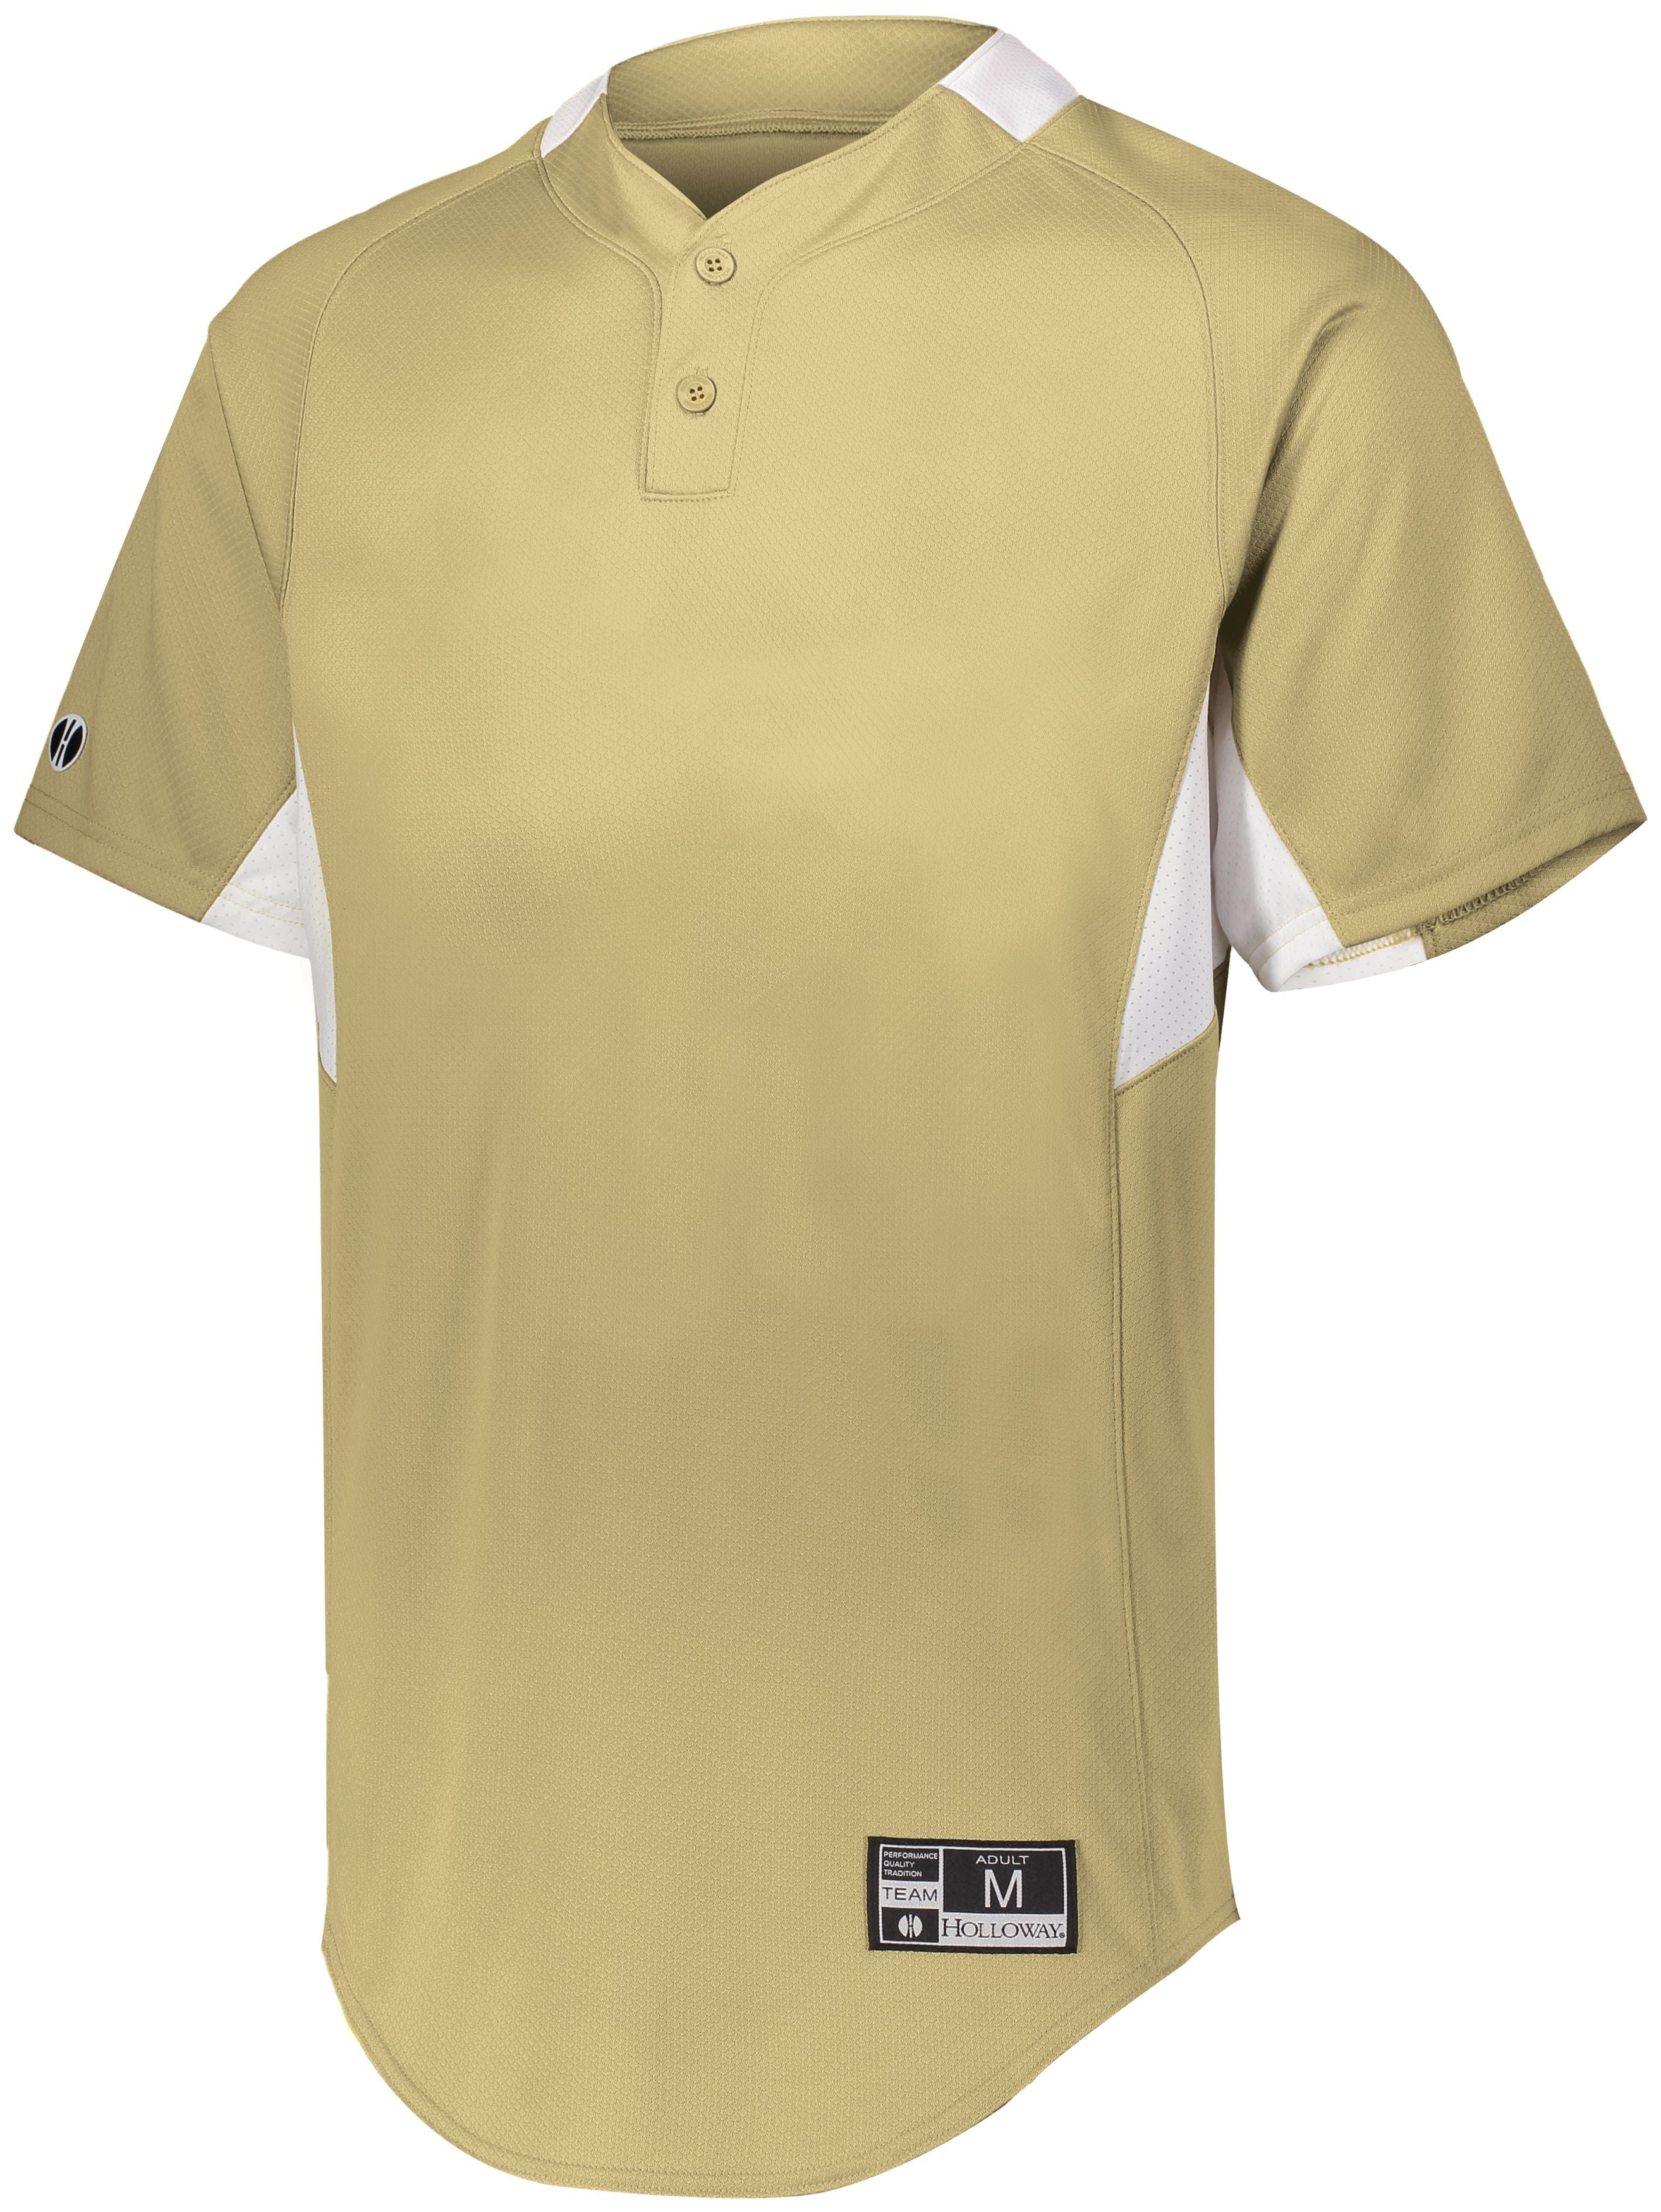 Holloway Youth  Game7 Two-Button Baseball Jersey in Vegas Gold/White  -Part of the Youth, Youth-Jersey, Baseball, Holloway, Shirts, All-Sports, All-Sports-1 product lines at KanaleyCreations.com